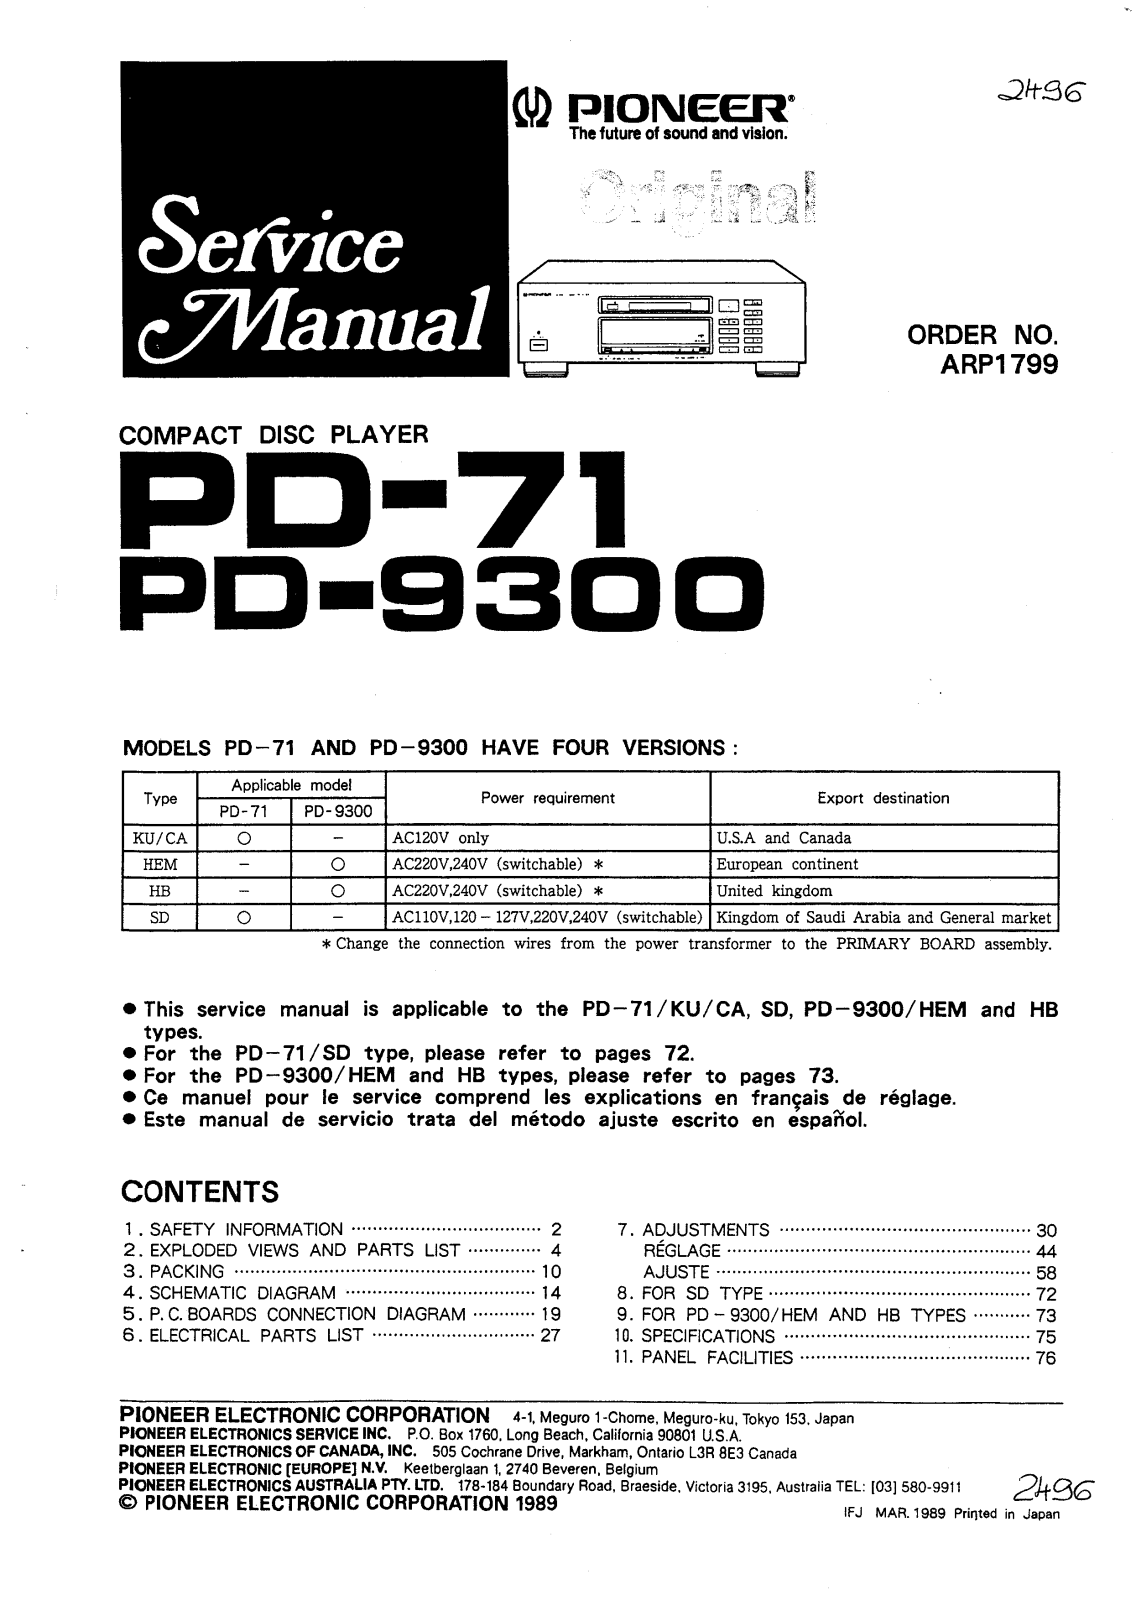 Pioneer PD-71, PD-9300 Service manual